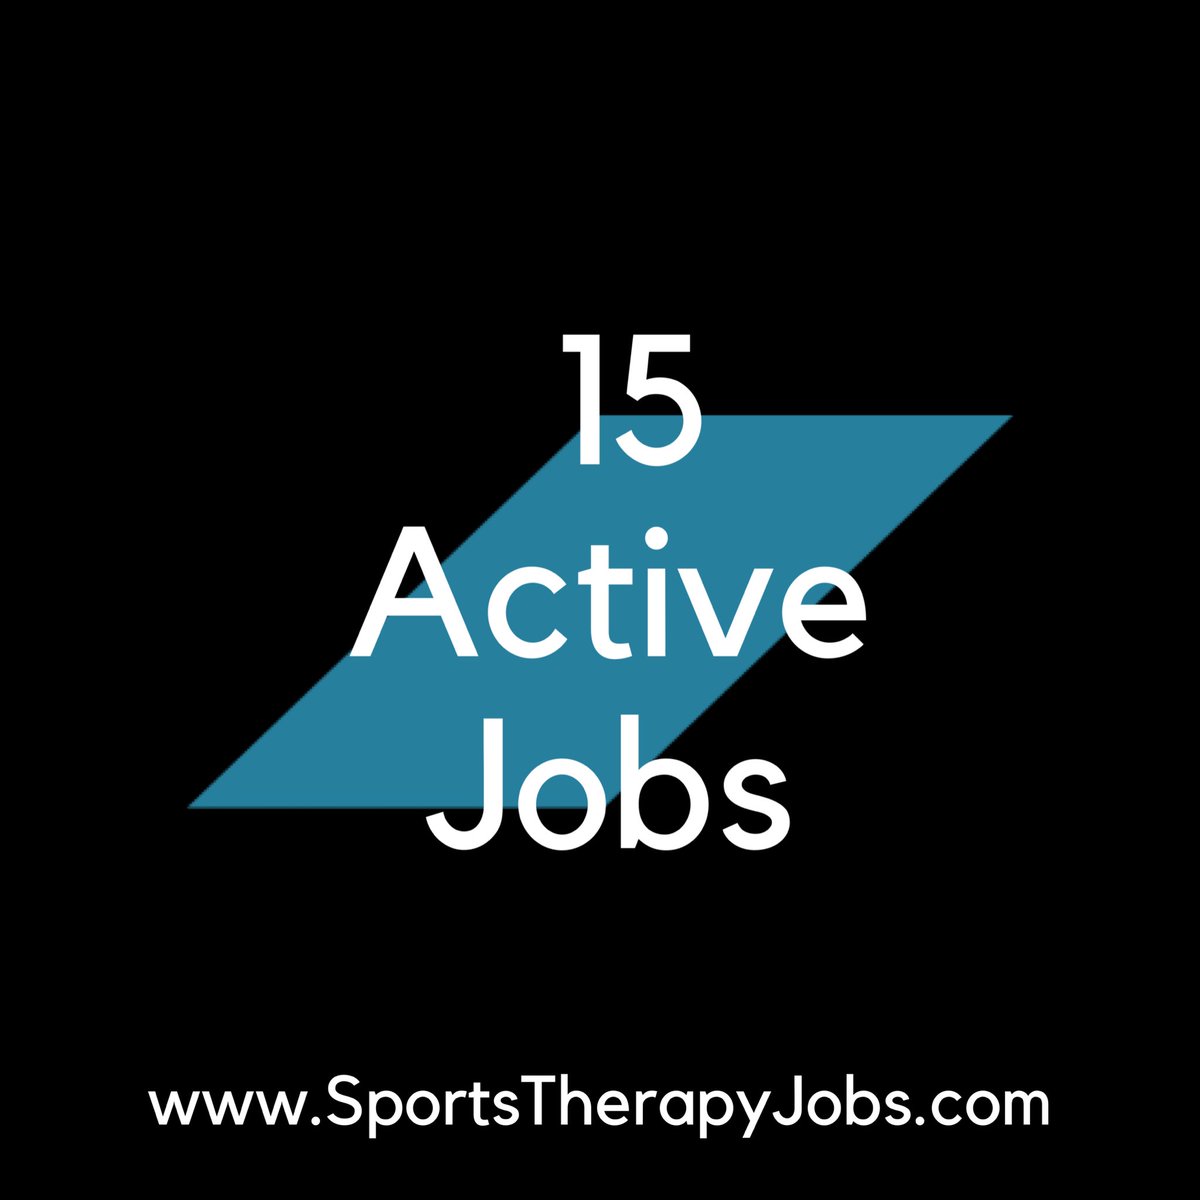 All jobs refreshed! 15 active jobs for Sports Therapists are currently listed on the website. Unfortunately no clinic or pitchside cover yet, for obvious reasons! #SportsTherapyJobs